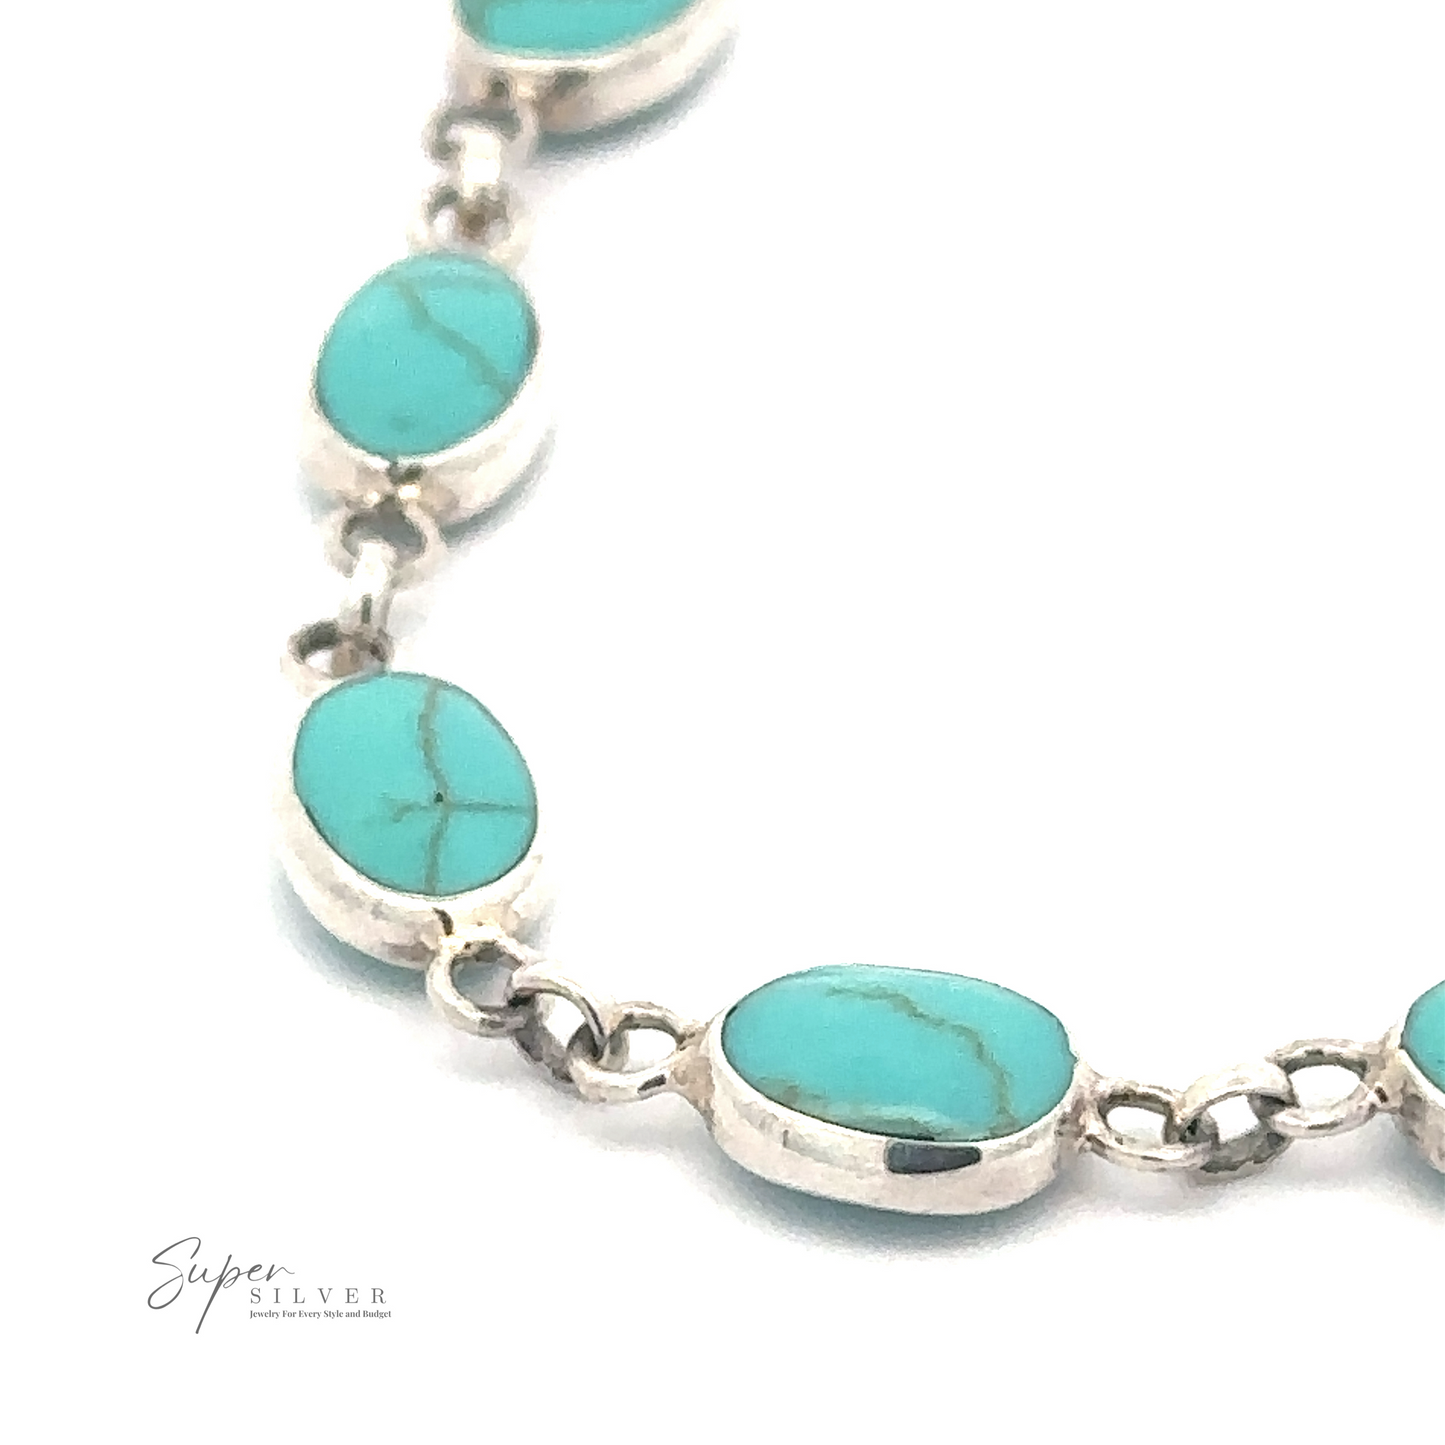 
                  
                    A sterling silver Oval Turquoise Bracelet featuring oval turquoise stones linked together. The stones have natural veining and are set in silver bezels. The brand logo "Super Silver" is visible in the bottom left corner.
                  
                